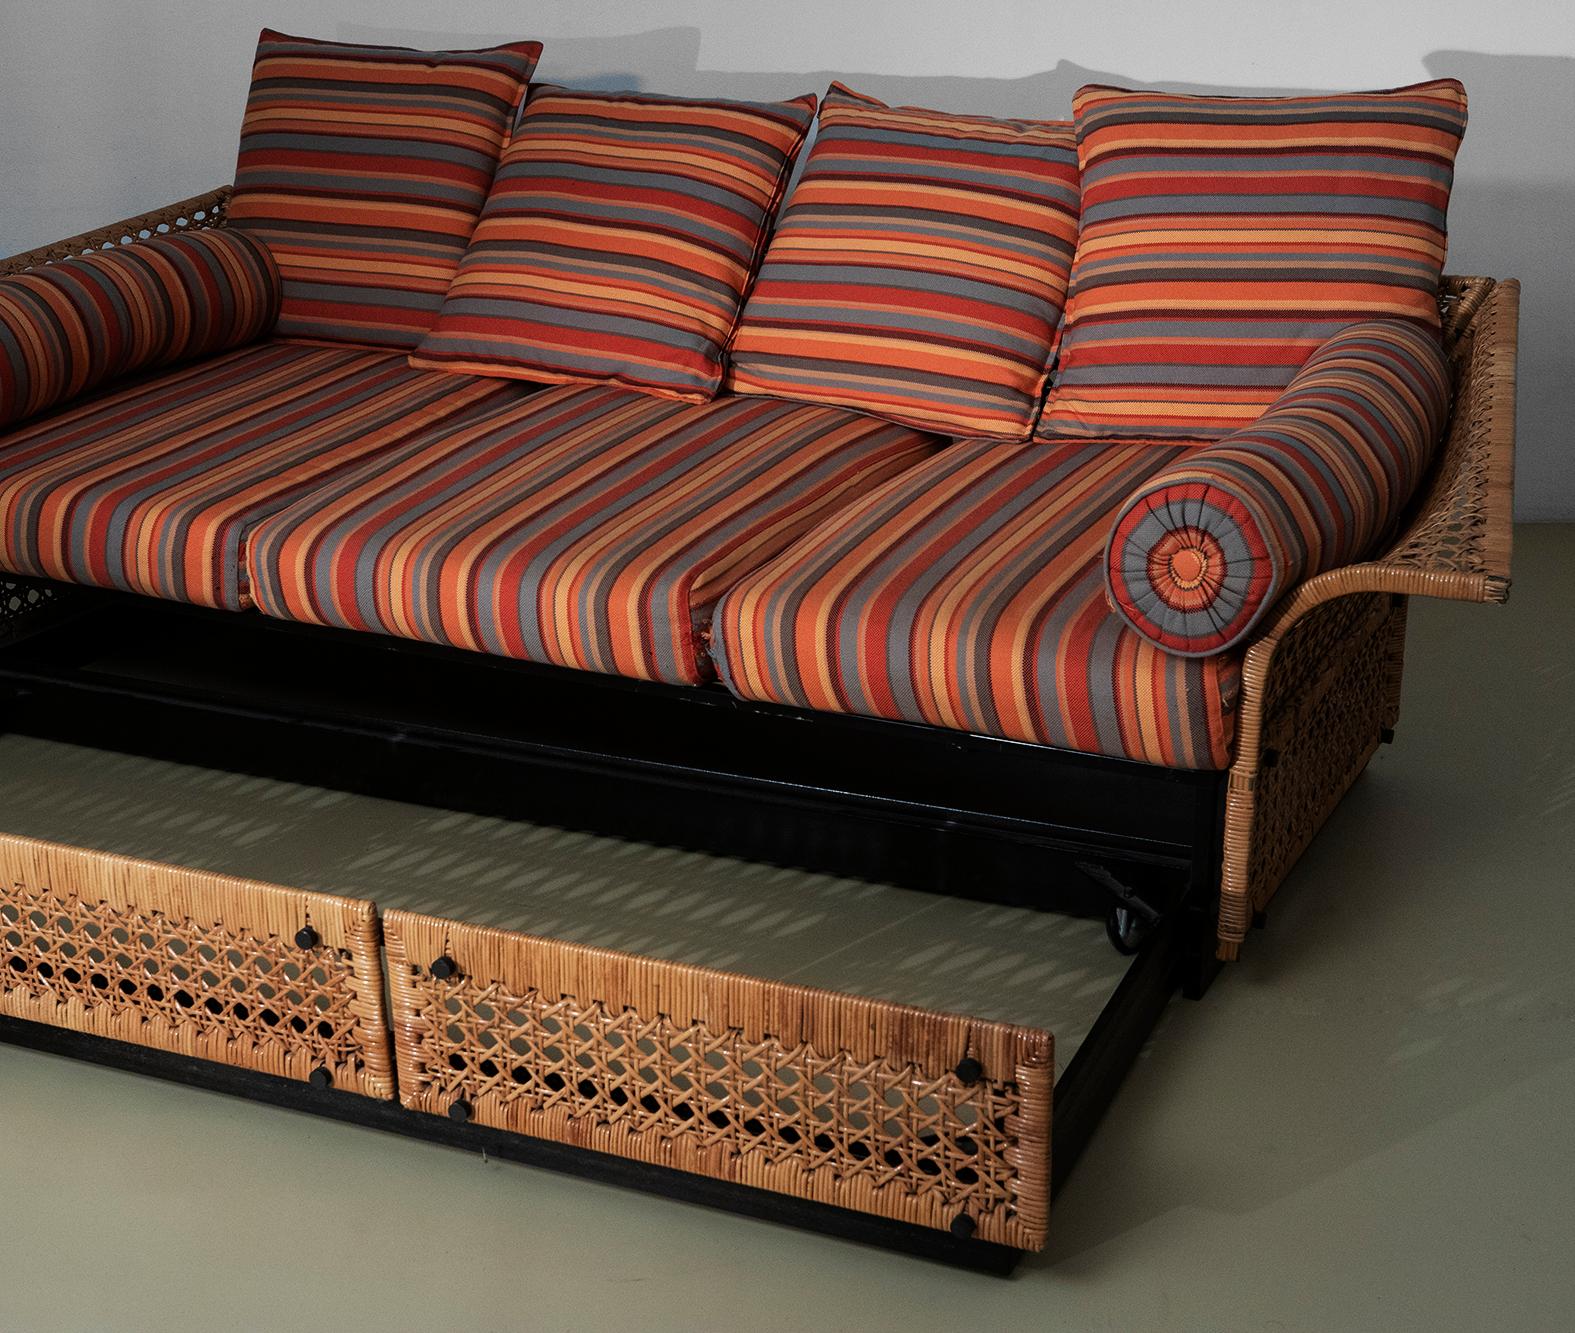 Marzio Cecchi, Sofa Bed
Sofa with pull-out bed, metal and guinea cane frame with cushions upholstered in striped fabric.
Production Italy, circa 1965

Dimensions are: 
W101xL255.5xH69 cm
with the bed open W183.5xL255.5xH69 cm
